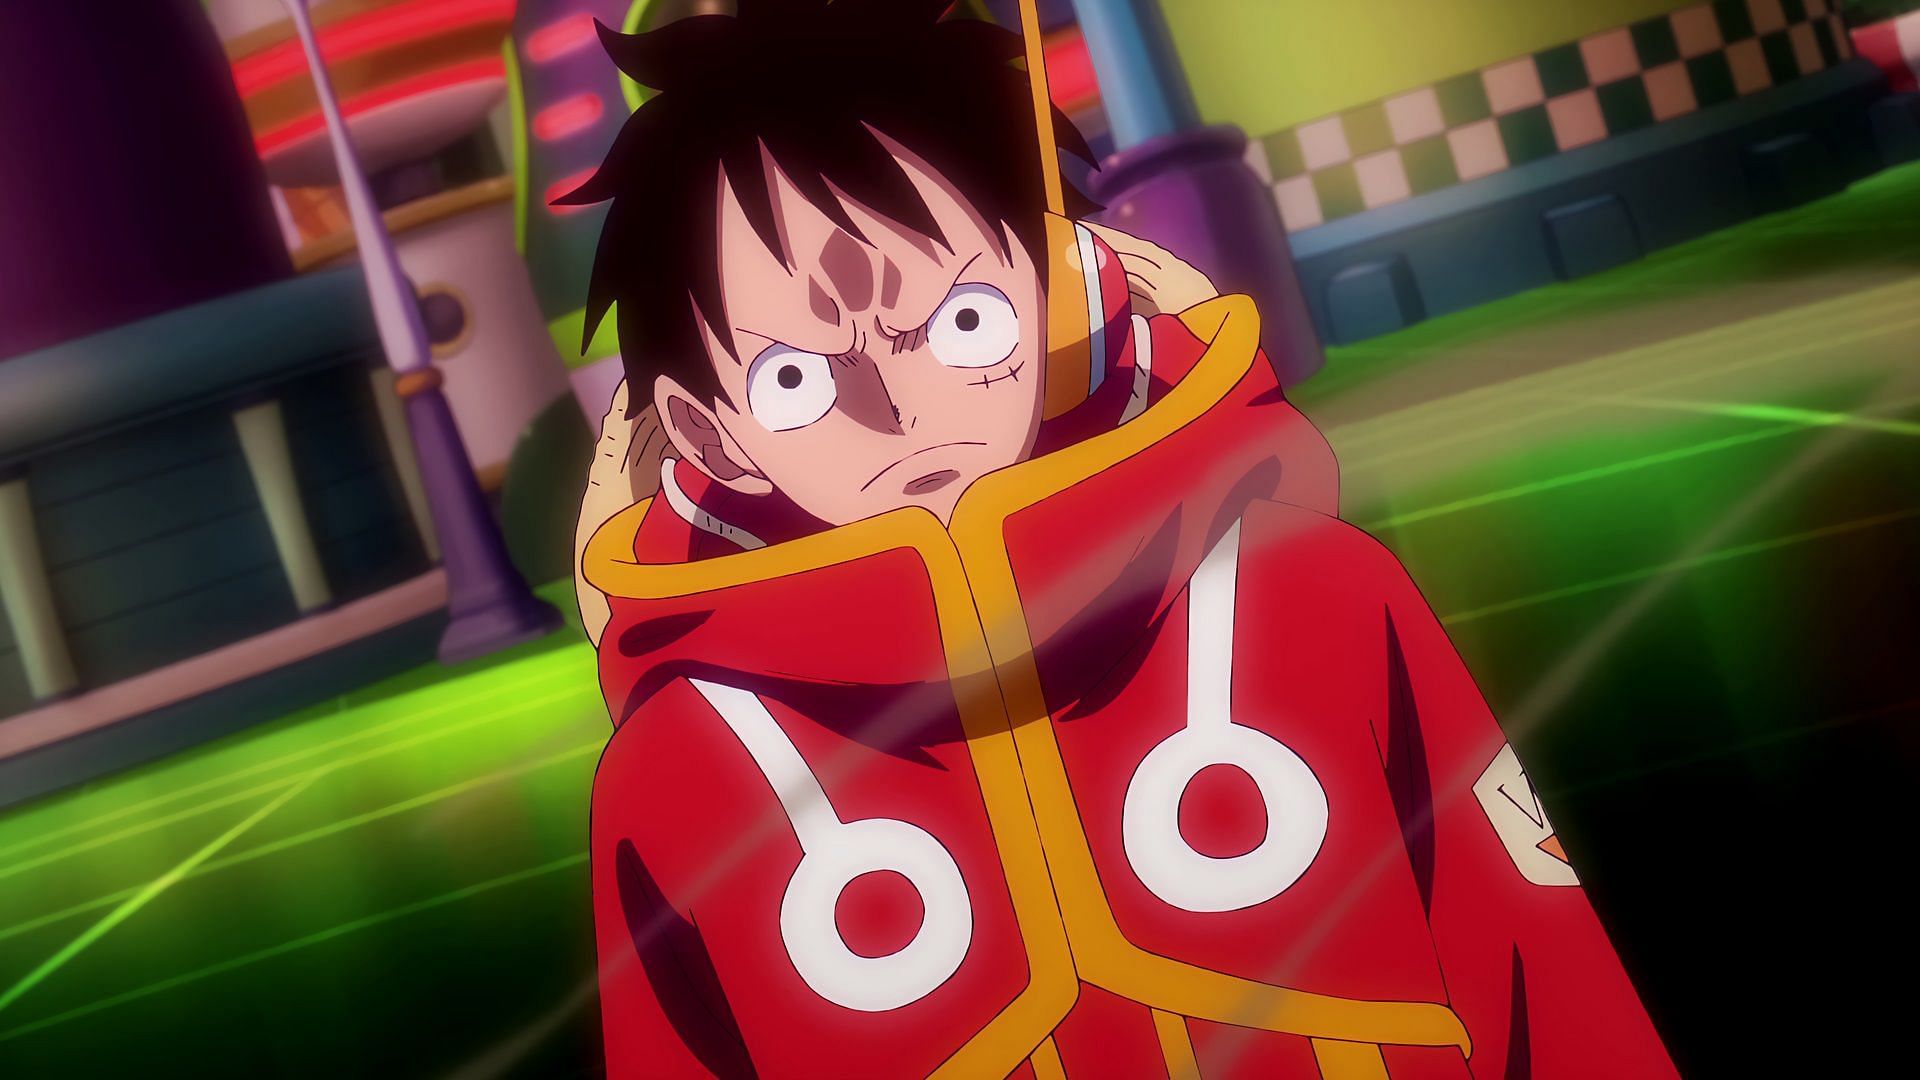 Luffy as seen in the One Piece anime (Image via Toei Animation)